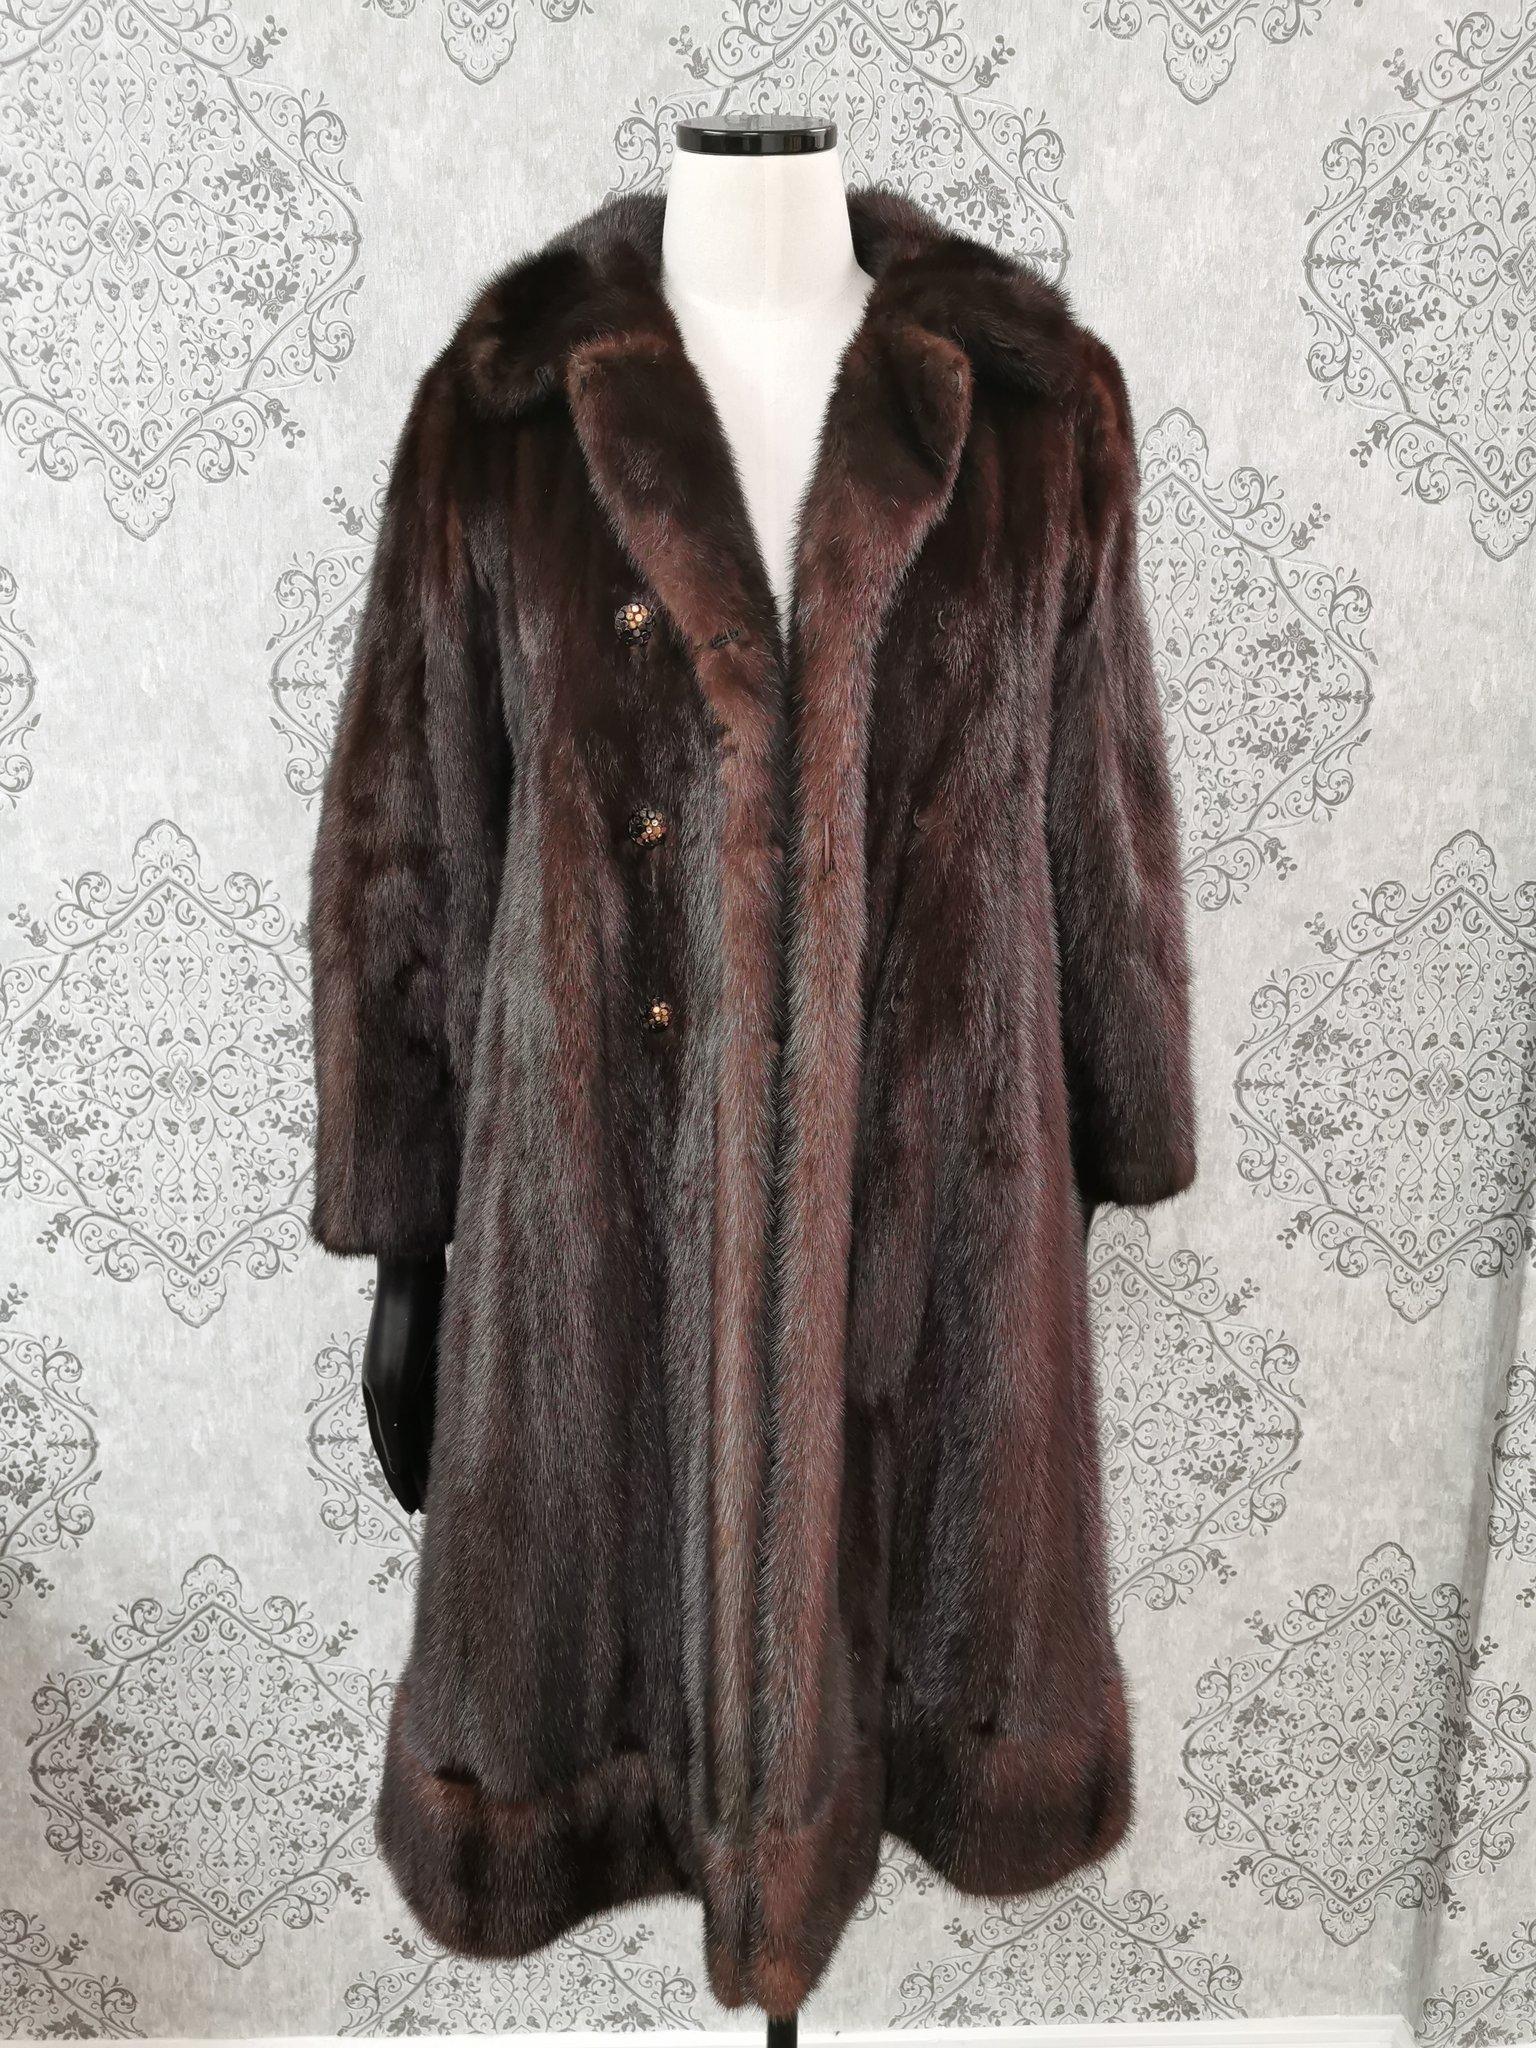 DESCRIPTION : 284 CHRISTIAN DIOR MINK FUR COAT SIZE 6:

Notch collar, straight sleeves, supple skins, beautiful fresh fur, european german clasps for closure, too slit pockets, nice big full pelts skins in excellent condition.

This item is made in